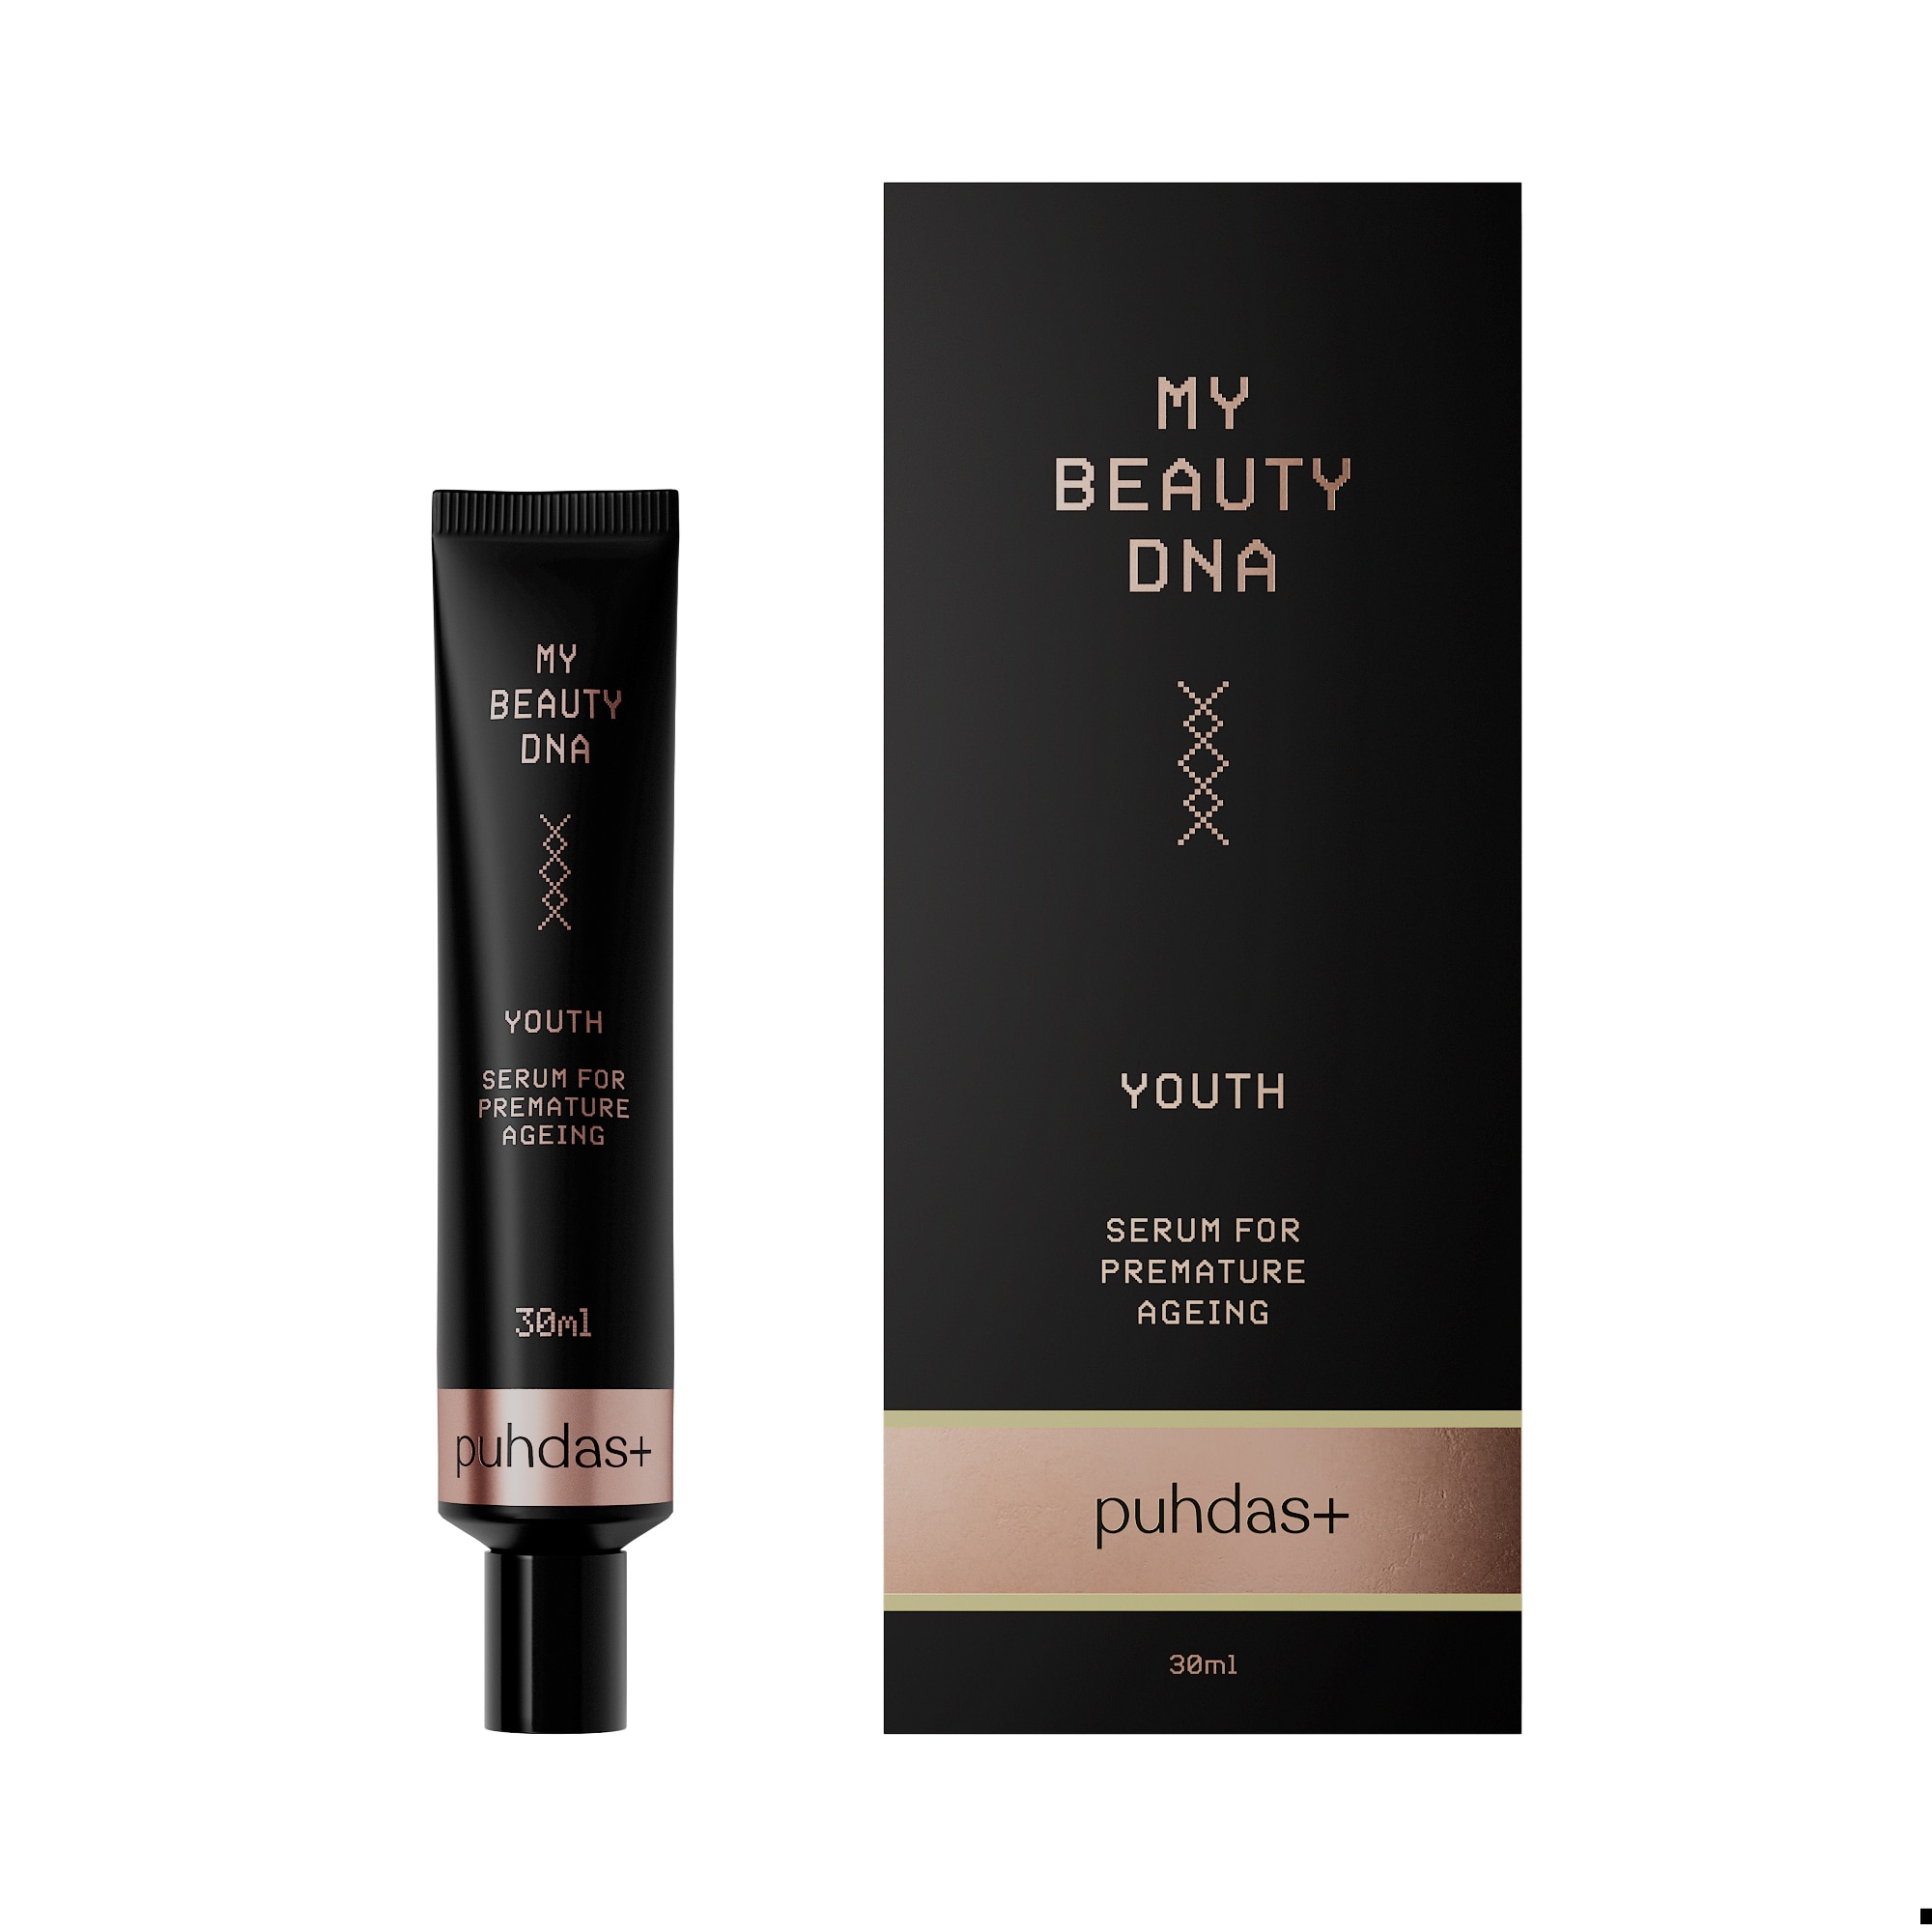 Puhdas+ Beauty DNA Youth Serum for Premature Ageing